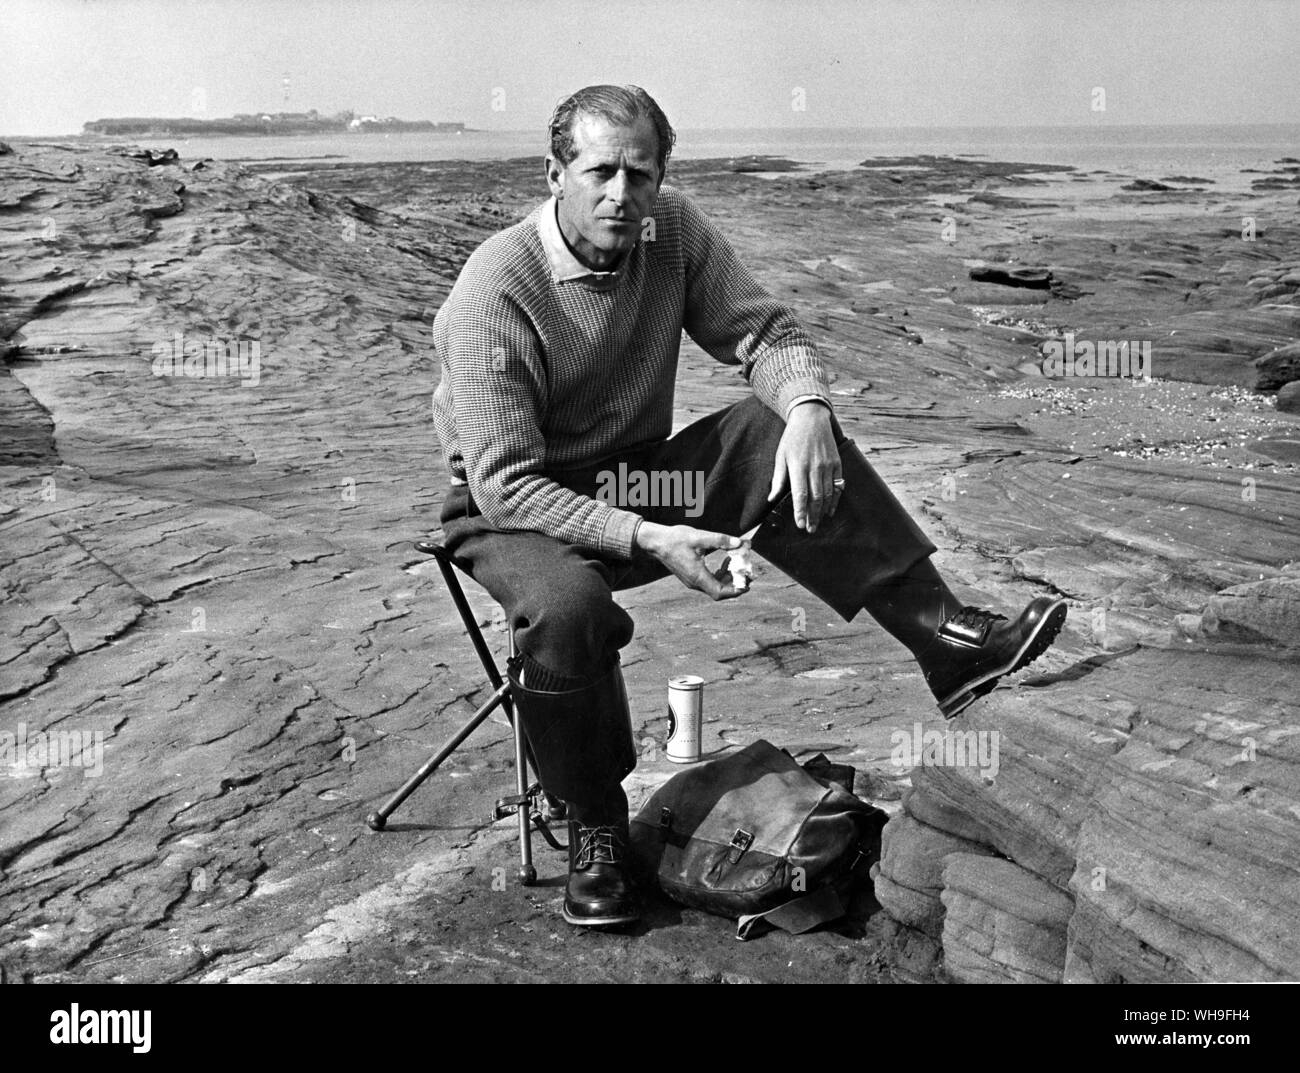 Prince Philip, Duke of Edinburgh. Husband of Queen Elizabeth II of England by the River Dee, Cheshire, 1970. Stock Photo